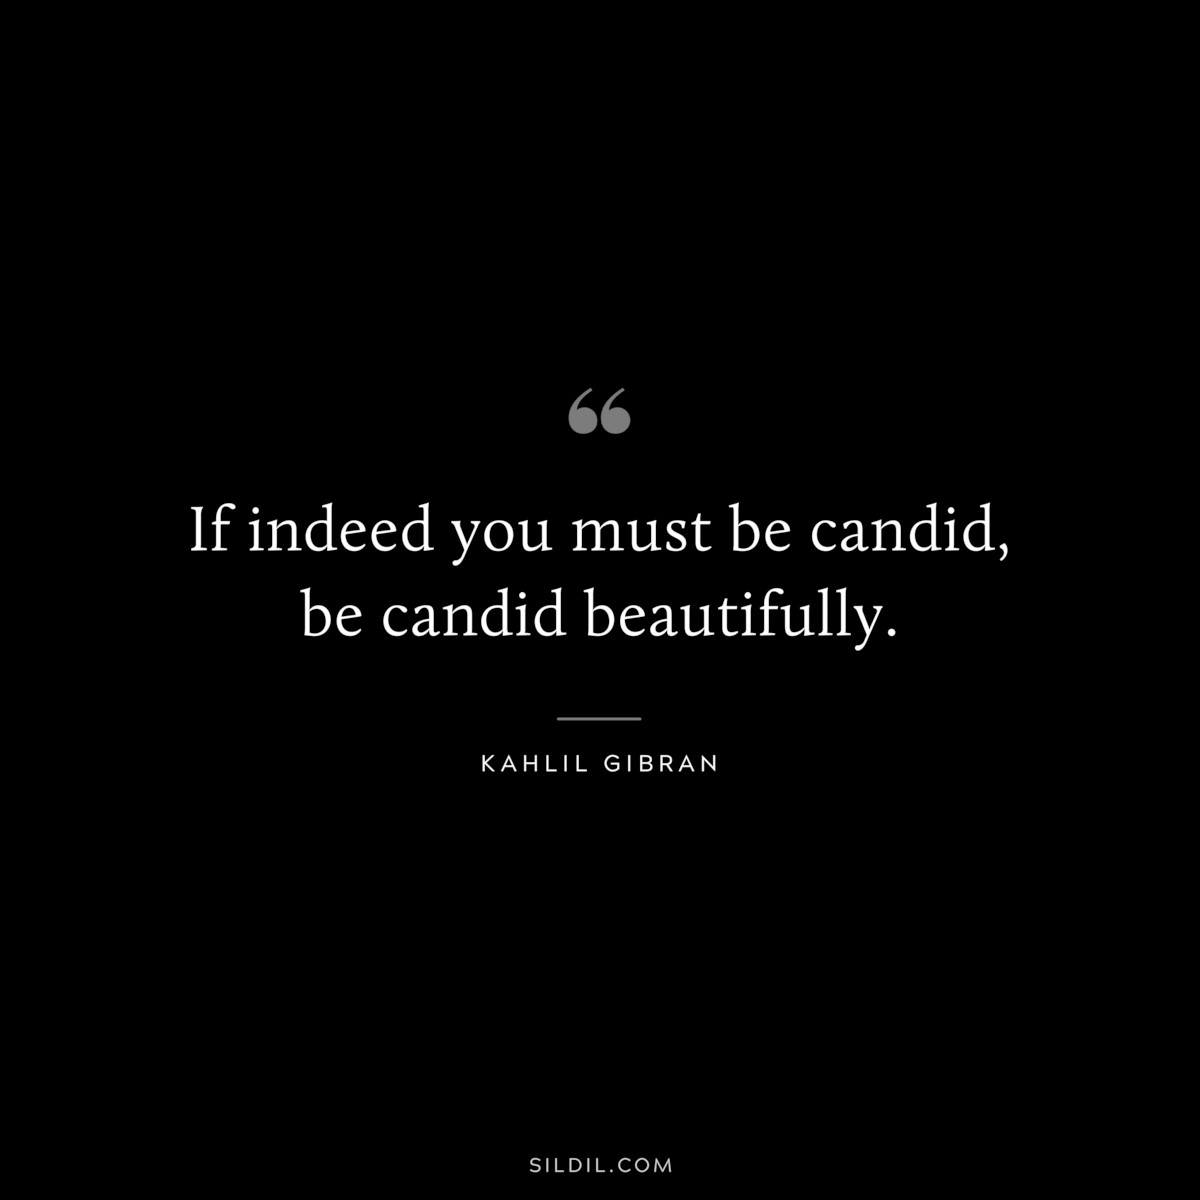 If indeed you must be candid, be candid beautifully. ― Kahlil Gibran